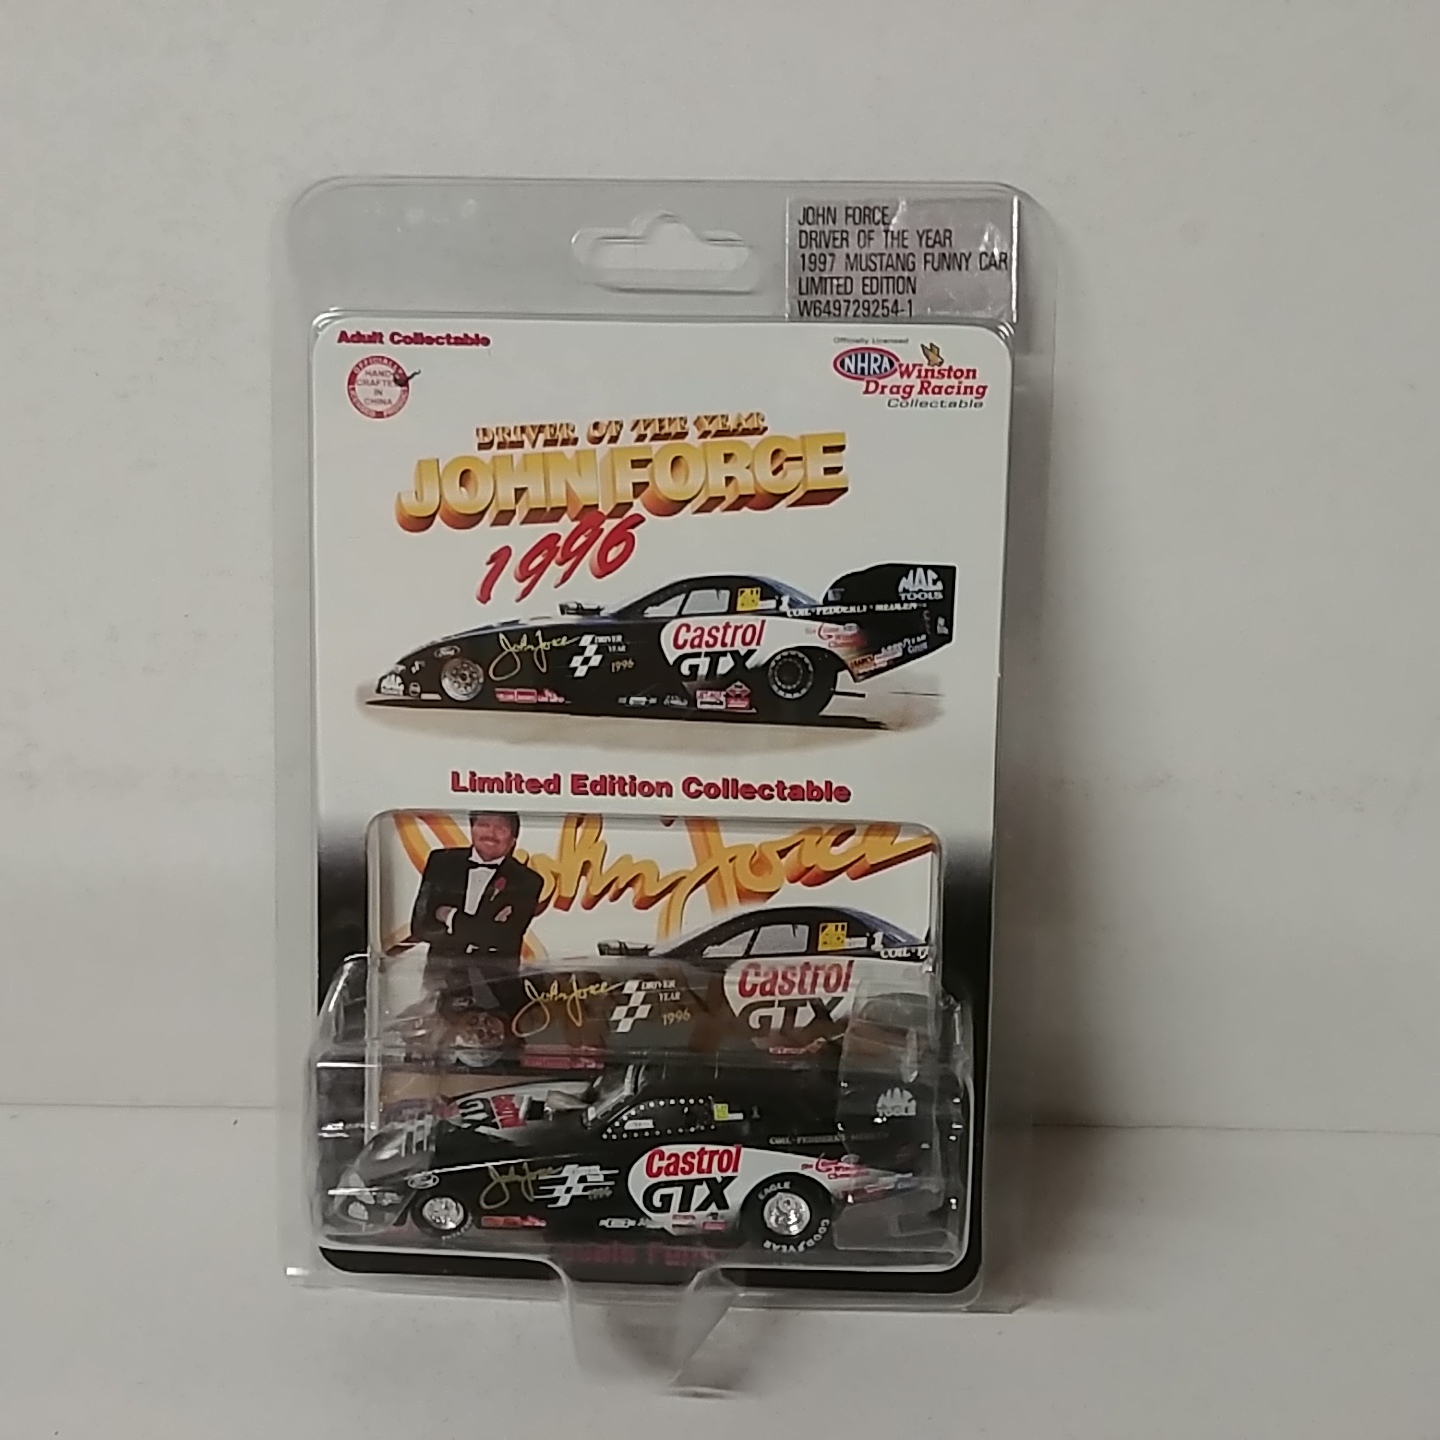 1996 John Force 1/64th Castrol GTX "Driver of the Year" funny car